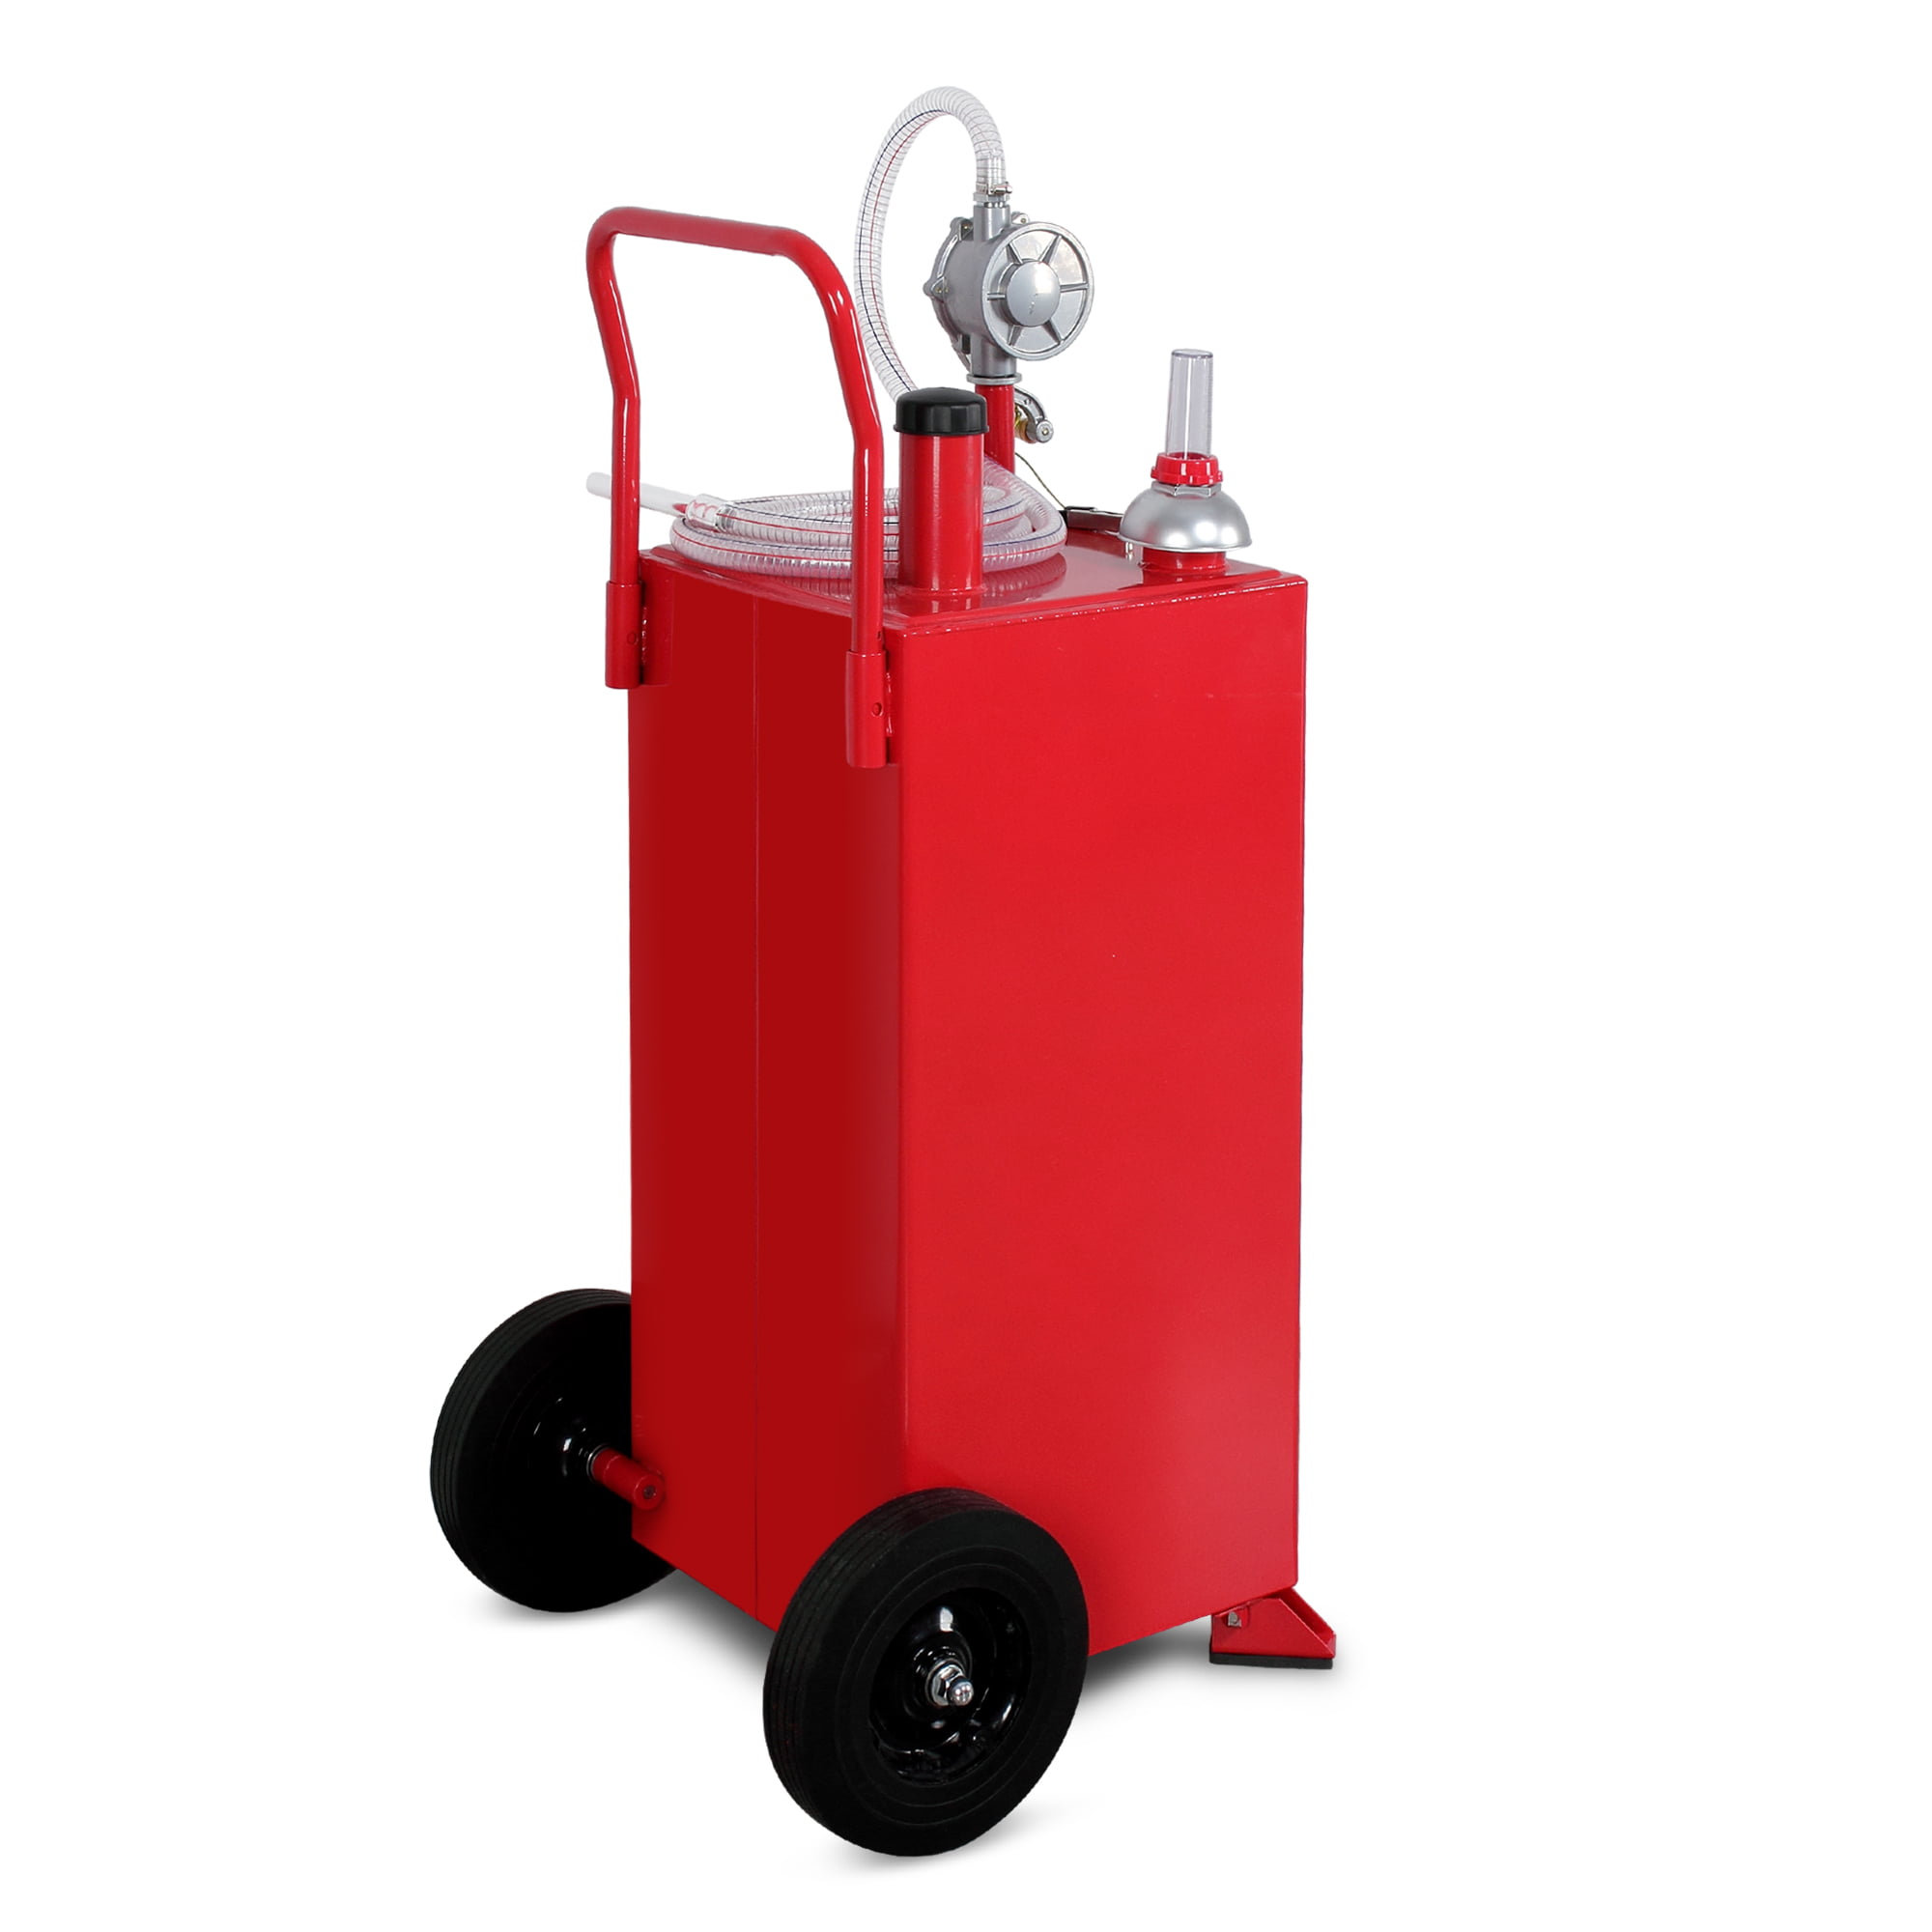 30 Gallon Portable Gas Caddy Fuel Storage Tank Large Gasoline Can W/Wheels Red 